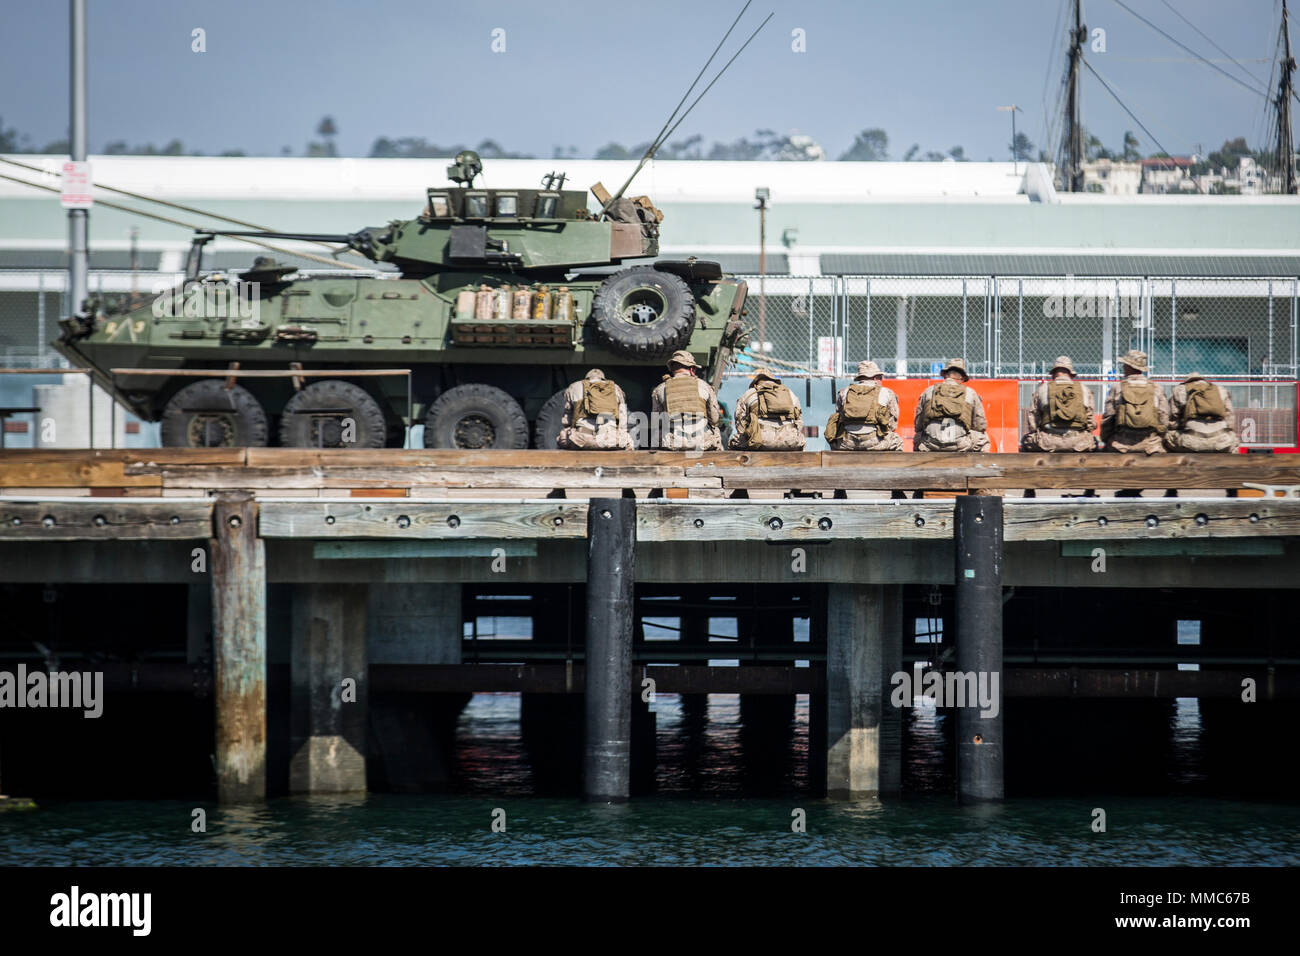 Marines with 3rd Light Armored Reconnaissance Battalion, 1st Marine Division, 1st Marine Expeditionary Force sit next to their vehicles on the Broadway Pier in San Diego, Calif., Oct. 11, 2017 as part of San Diego Fleet Week. Fleet week provides an opportunity for the American public to meet their Marine Corps, Navy and Coast Guard team and experience America's sea services. (U.S. Marine Corps photo by Lance Cpl. Gabino Perez) Stock Photo